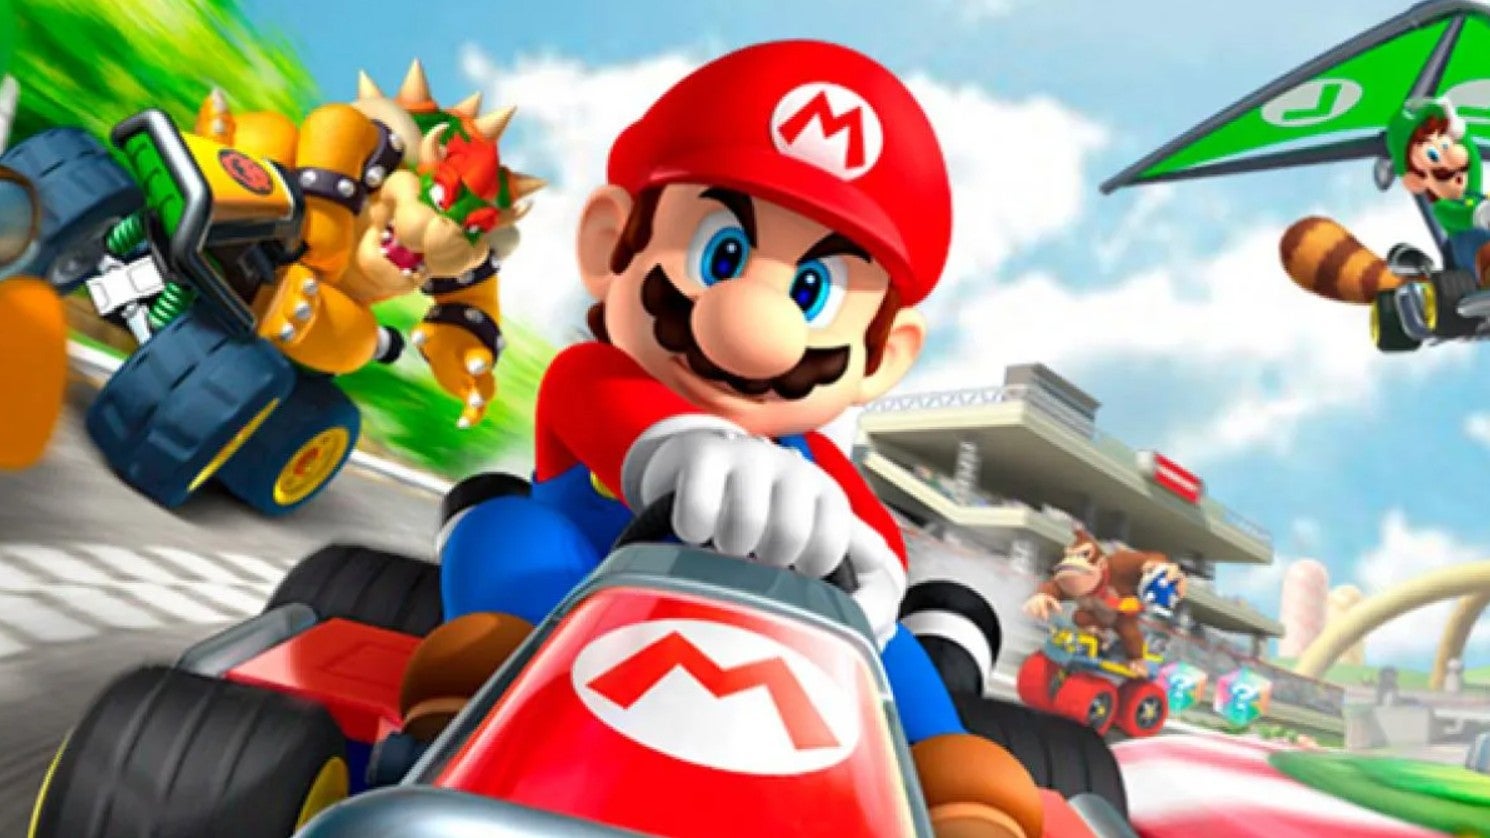 Image for Nintendo releases first update in 10 years for Mario Kart 7